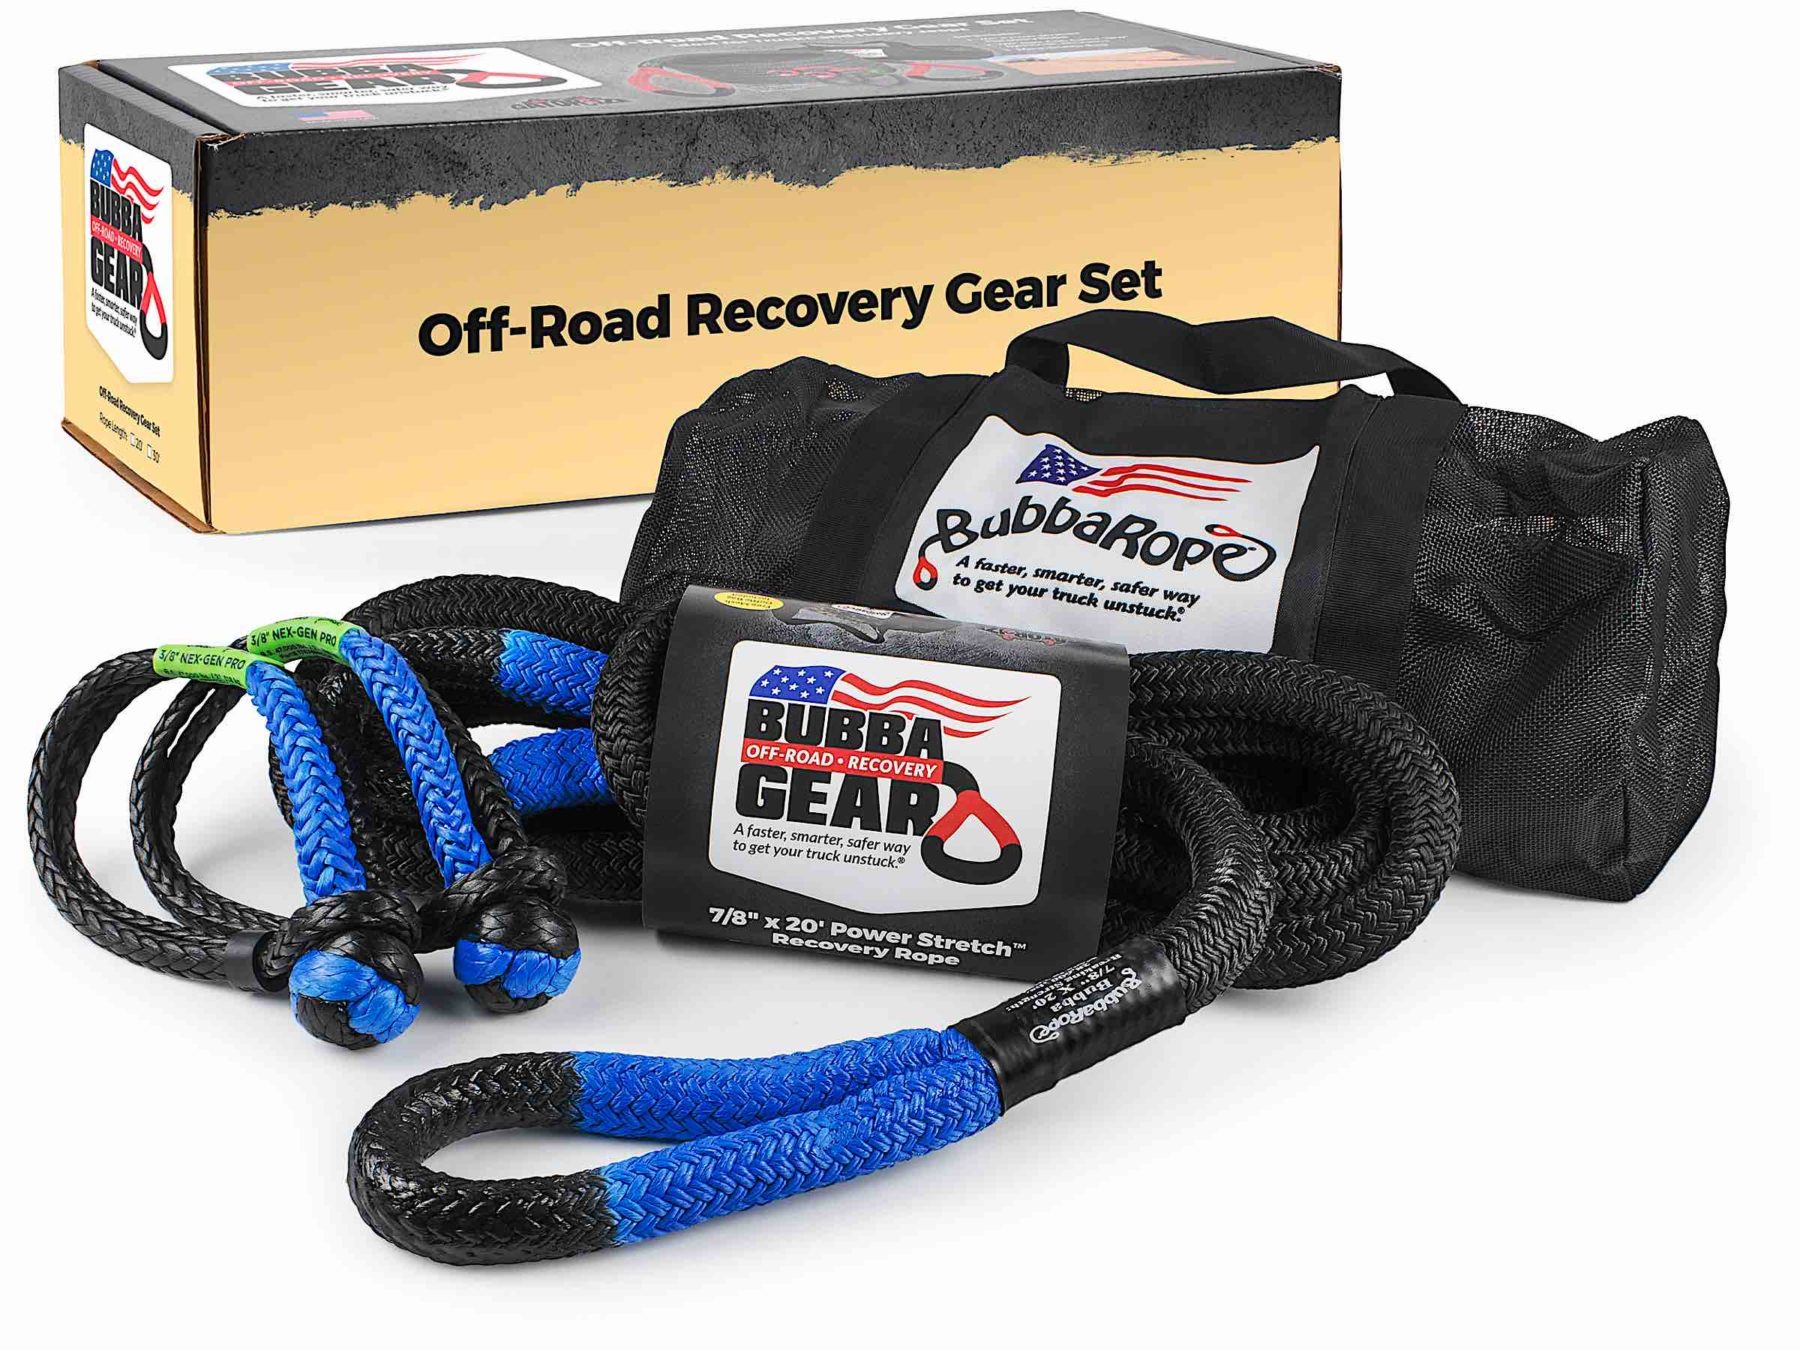 Bubba Off-Road Recovery Gear